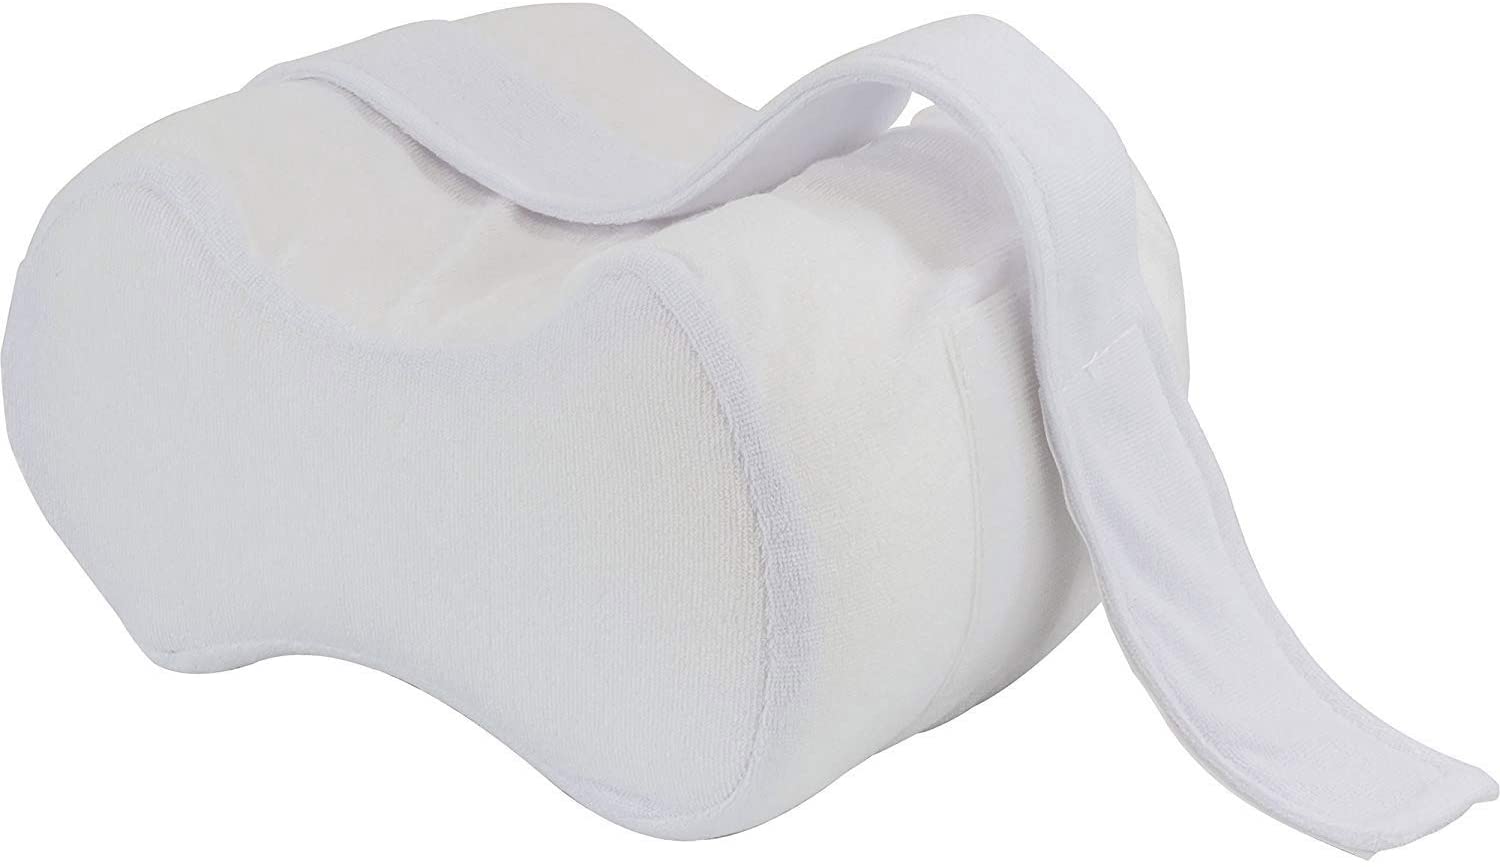 What Are The Benefits Of Sleeping With A Knee Pillow?